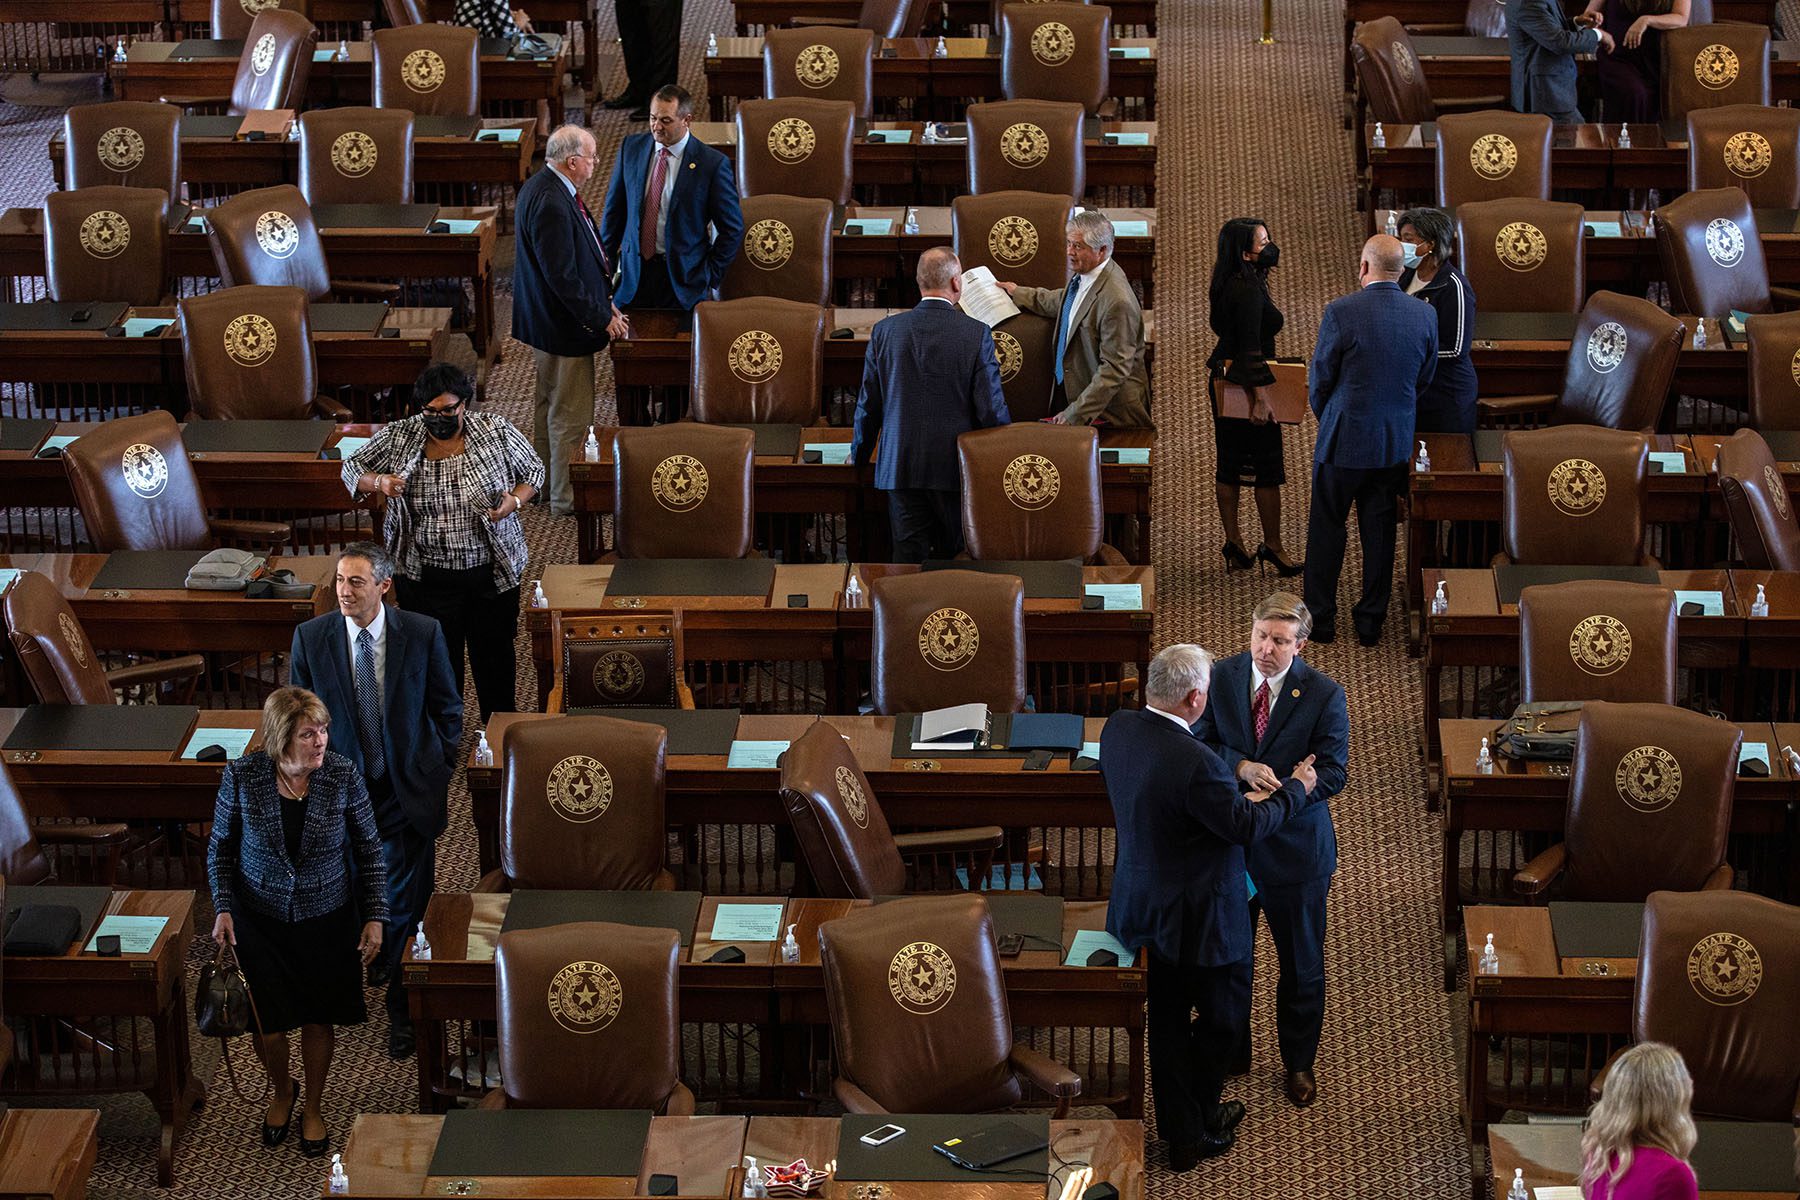 Texas state representatives gather in the House chamber at the Texas State Capitol.